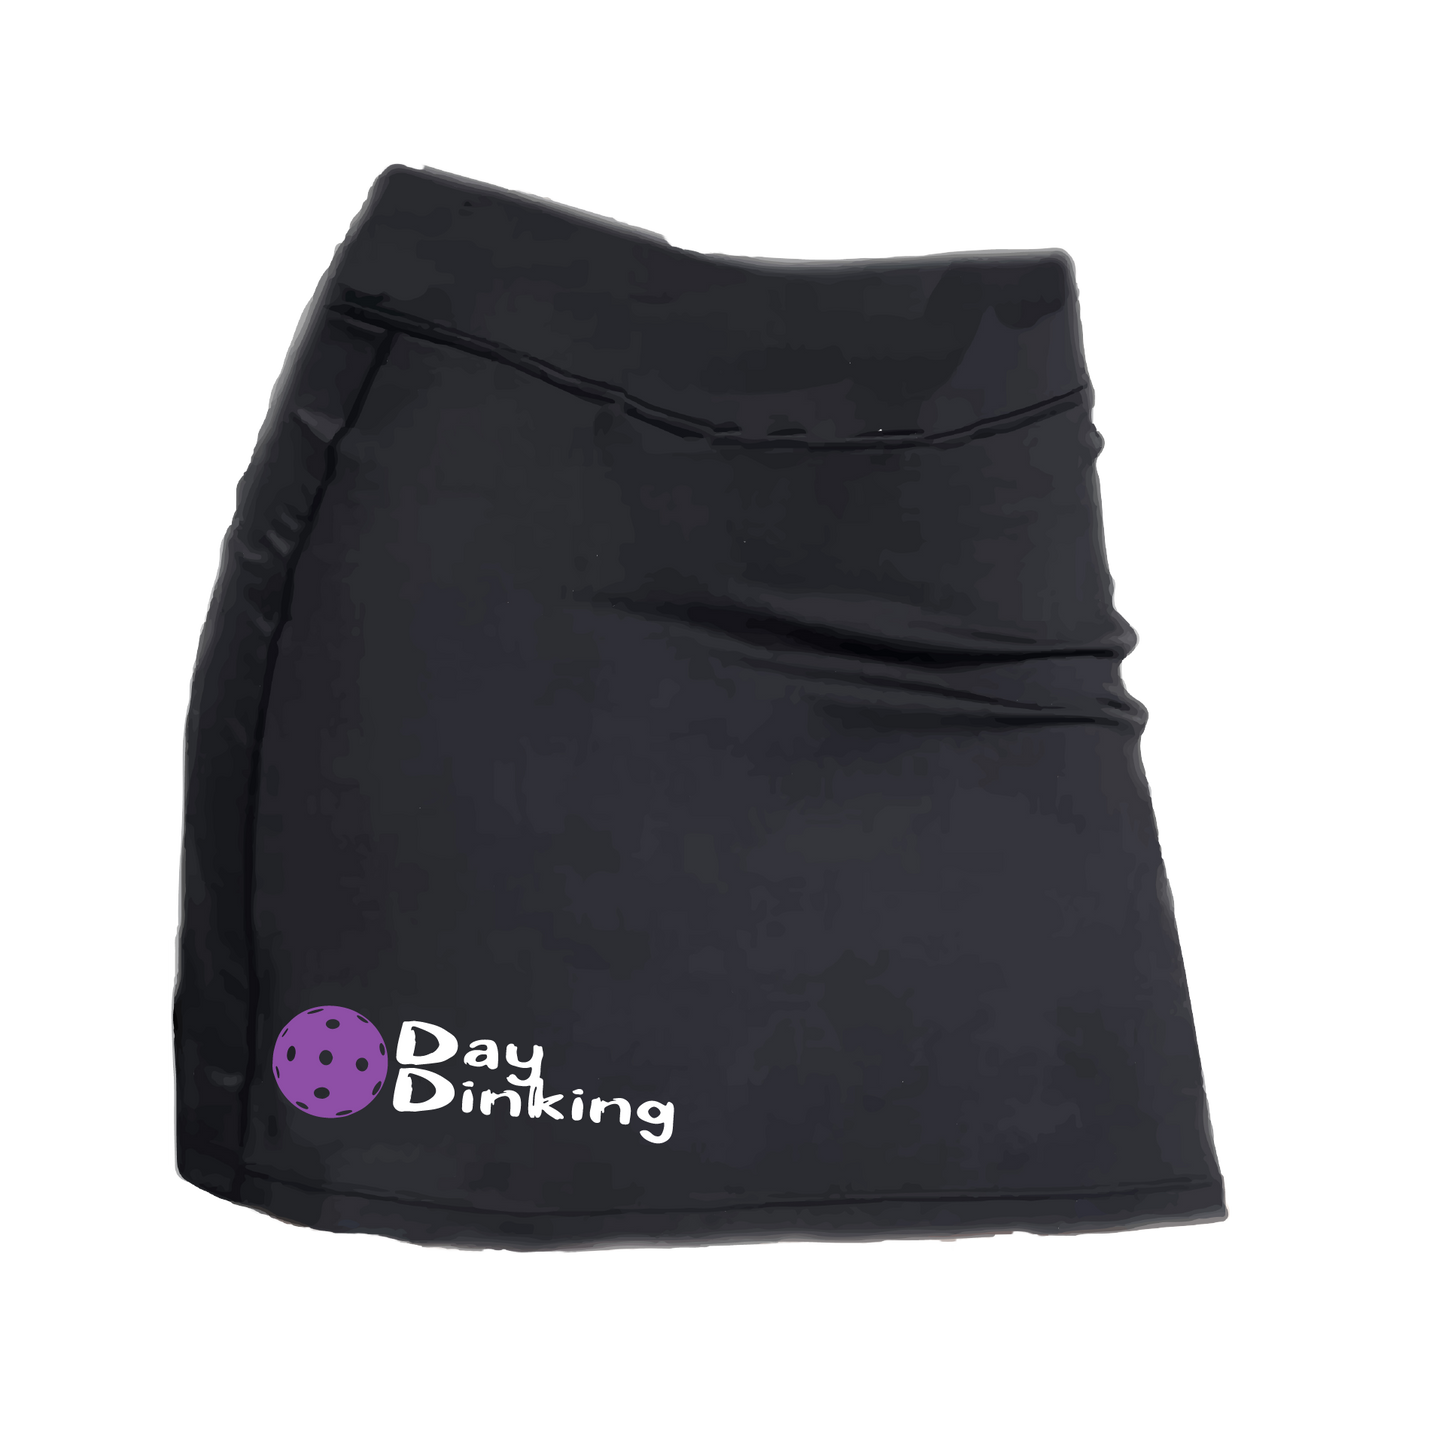 Skort Design: Day Dinking with Customizable Pickleball color (Purple, Rainbow, White, & Yellow.)  Women’s core active jersey-knit skort comes with built-in shorts made out of a poly-spandex blend.  The fabric is breathable, featuring Dri-Works wicking technology which allows your skin to breathe while simultaneously absorbing the moisture, keeping you dry and comfortable.